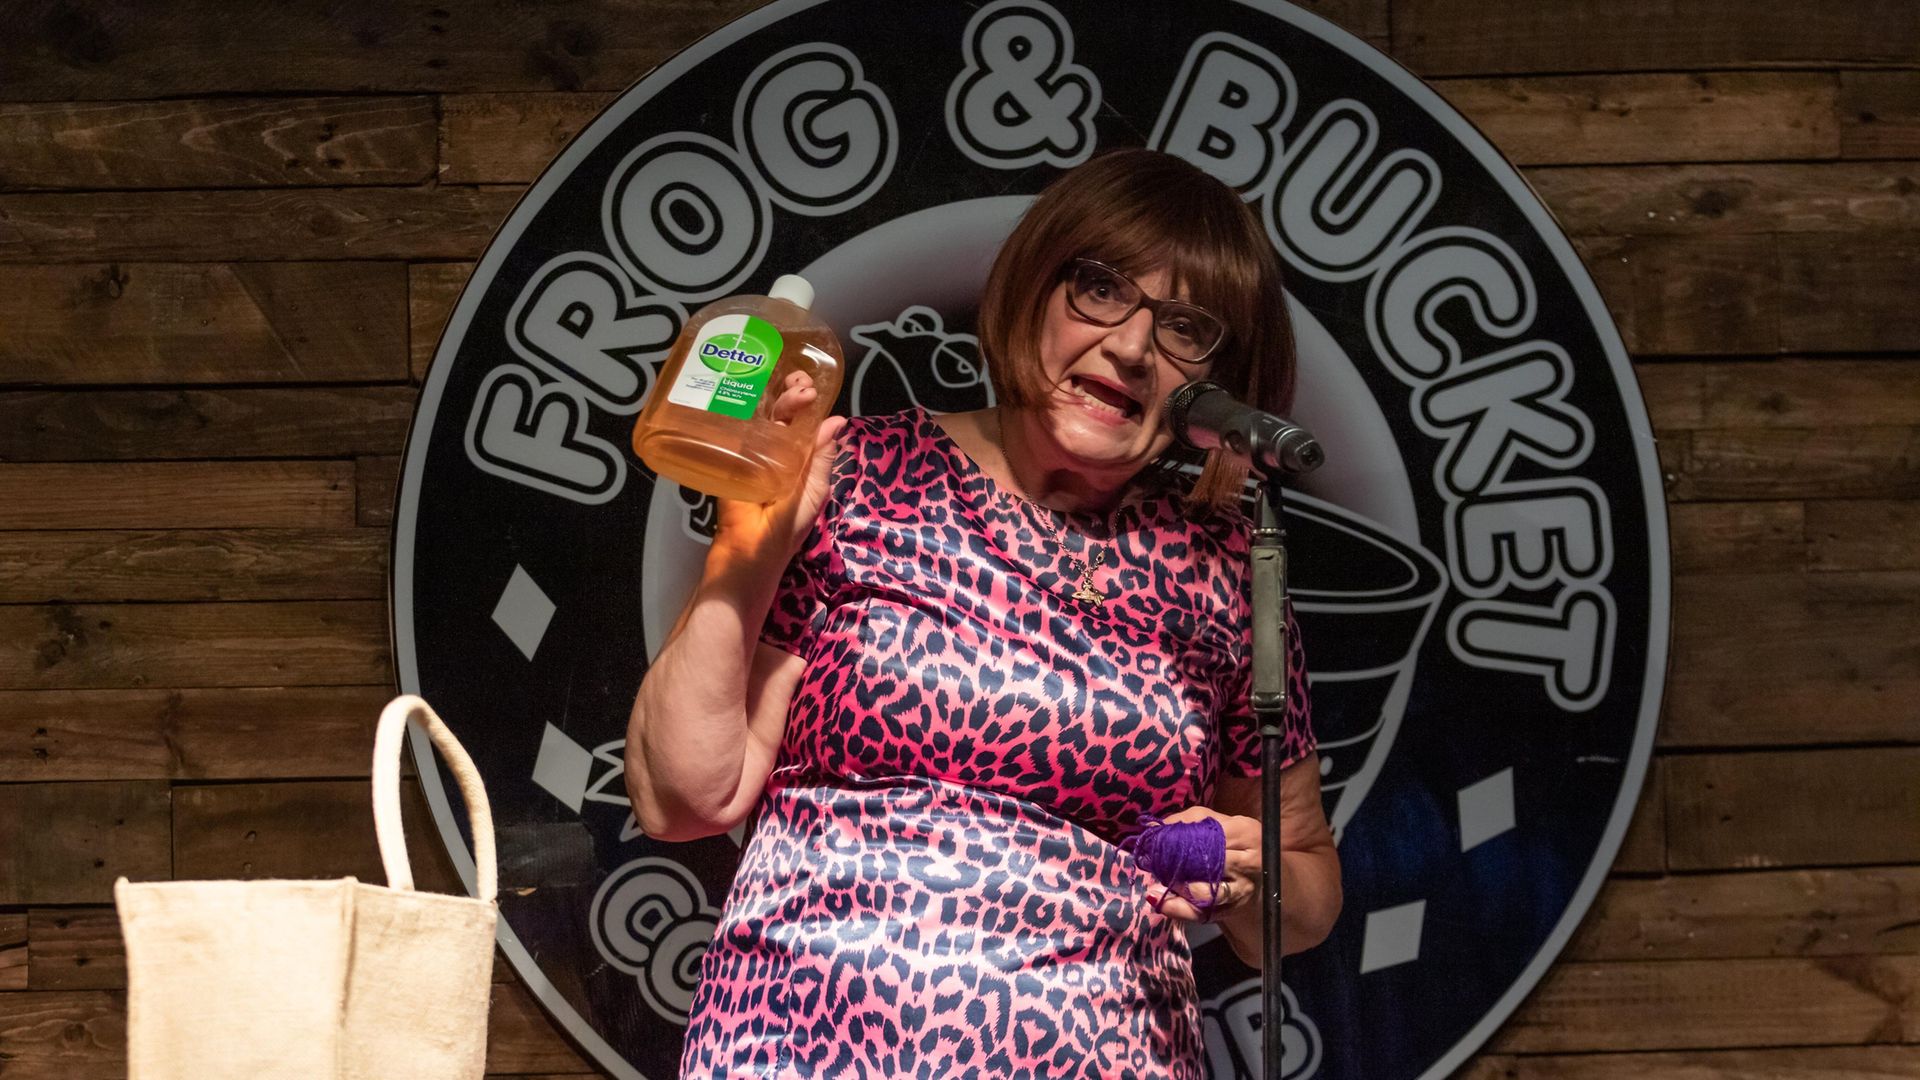 Janice Connolly aka Barbara Nice performs at the Women In Comedy Festival Fundraiser at the Frog and Bucket Comedy Club in Manchester. (Photo by Carla Speight/Getty Images) - Credit: Getty Images